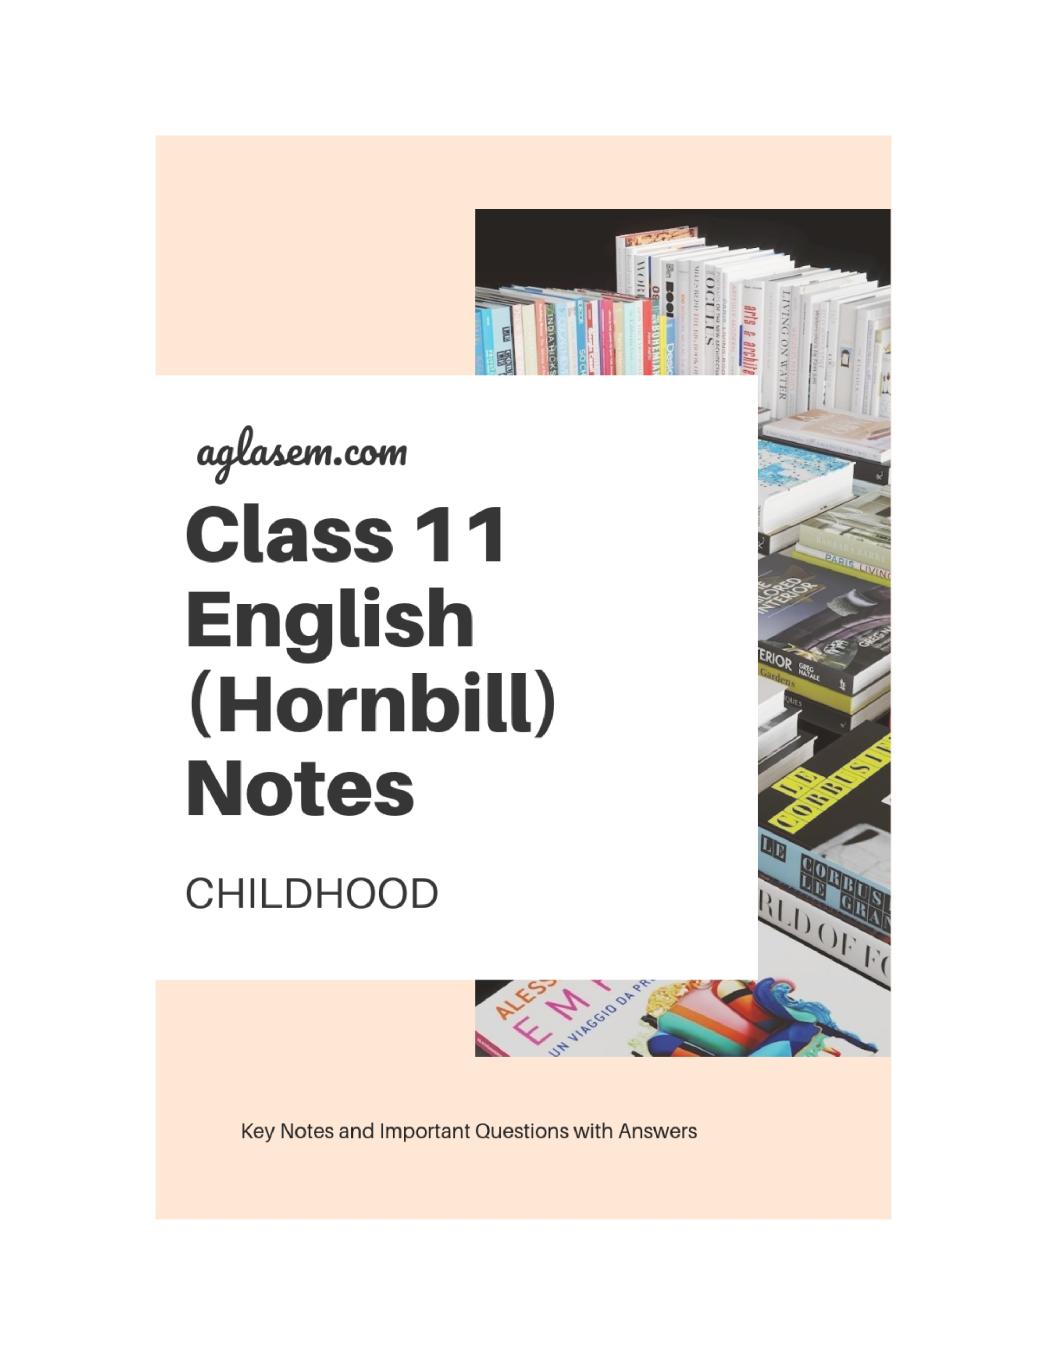 Class 11 English Hornbill Notes For Childhood - Page 1